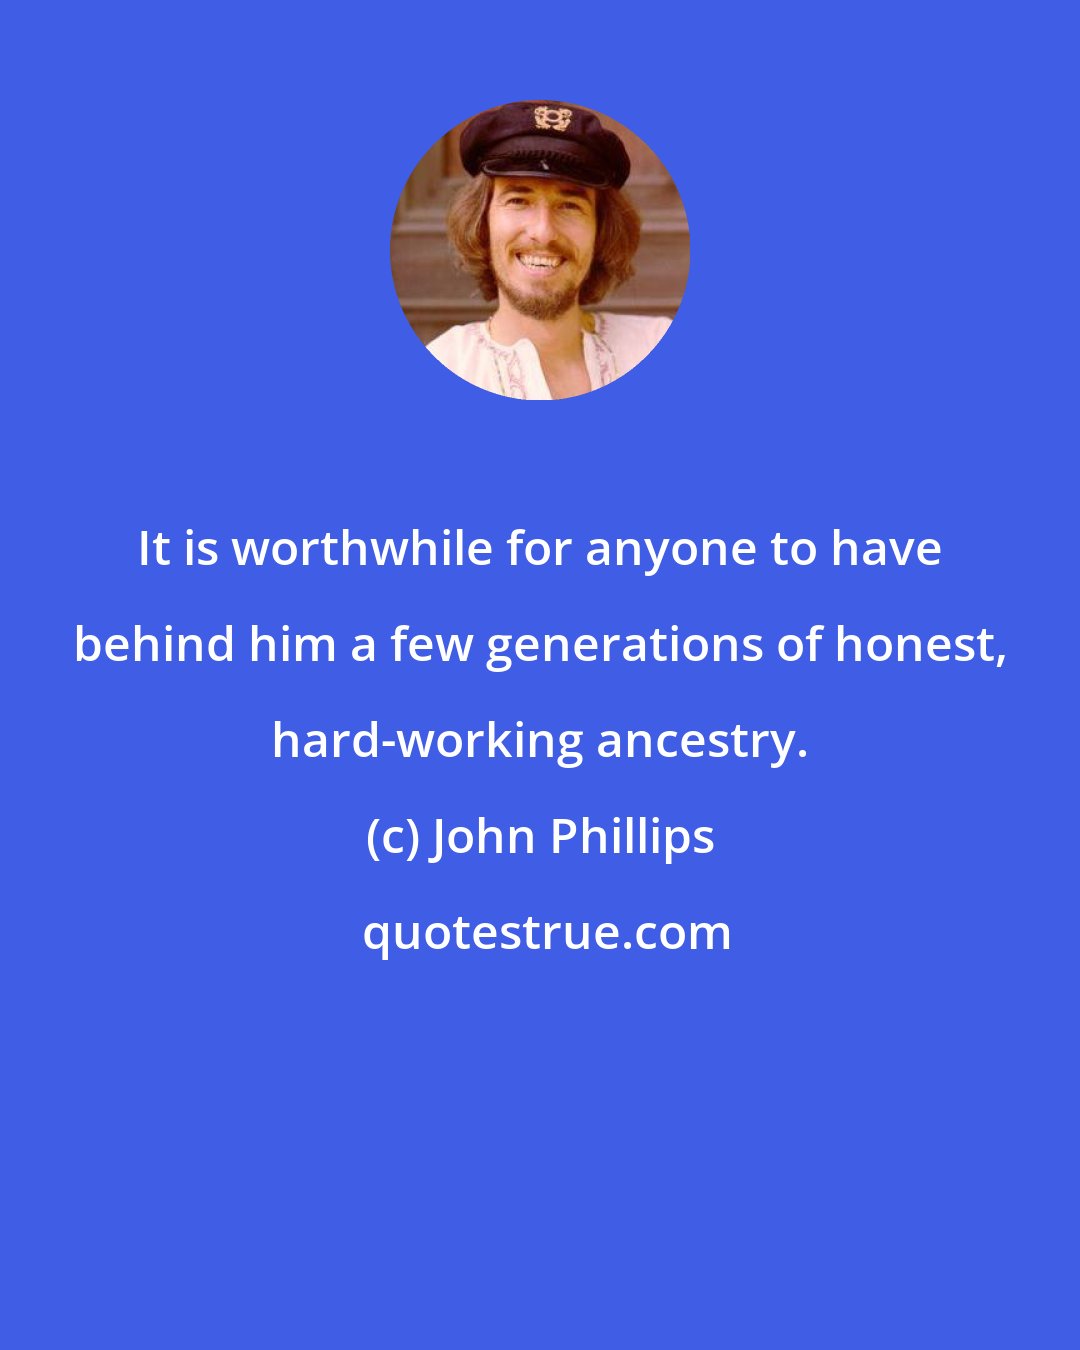 John Phillips: It is worthwhile for anyone to have behind him a few generations of honest, hard-working ancestry.